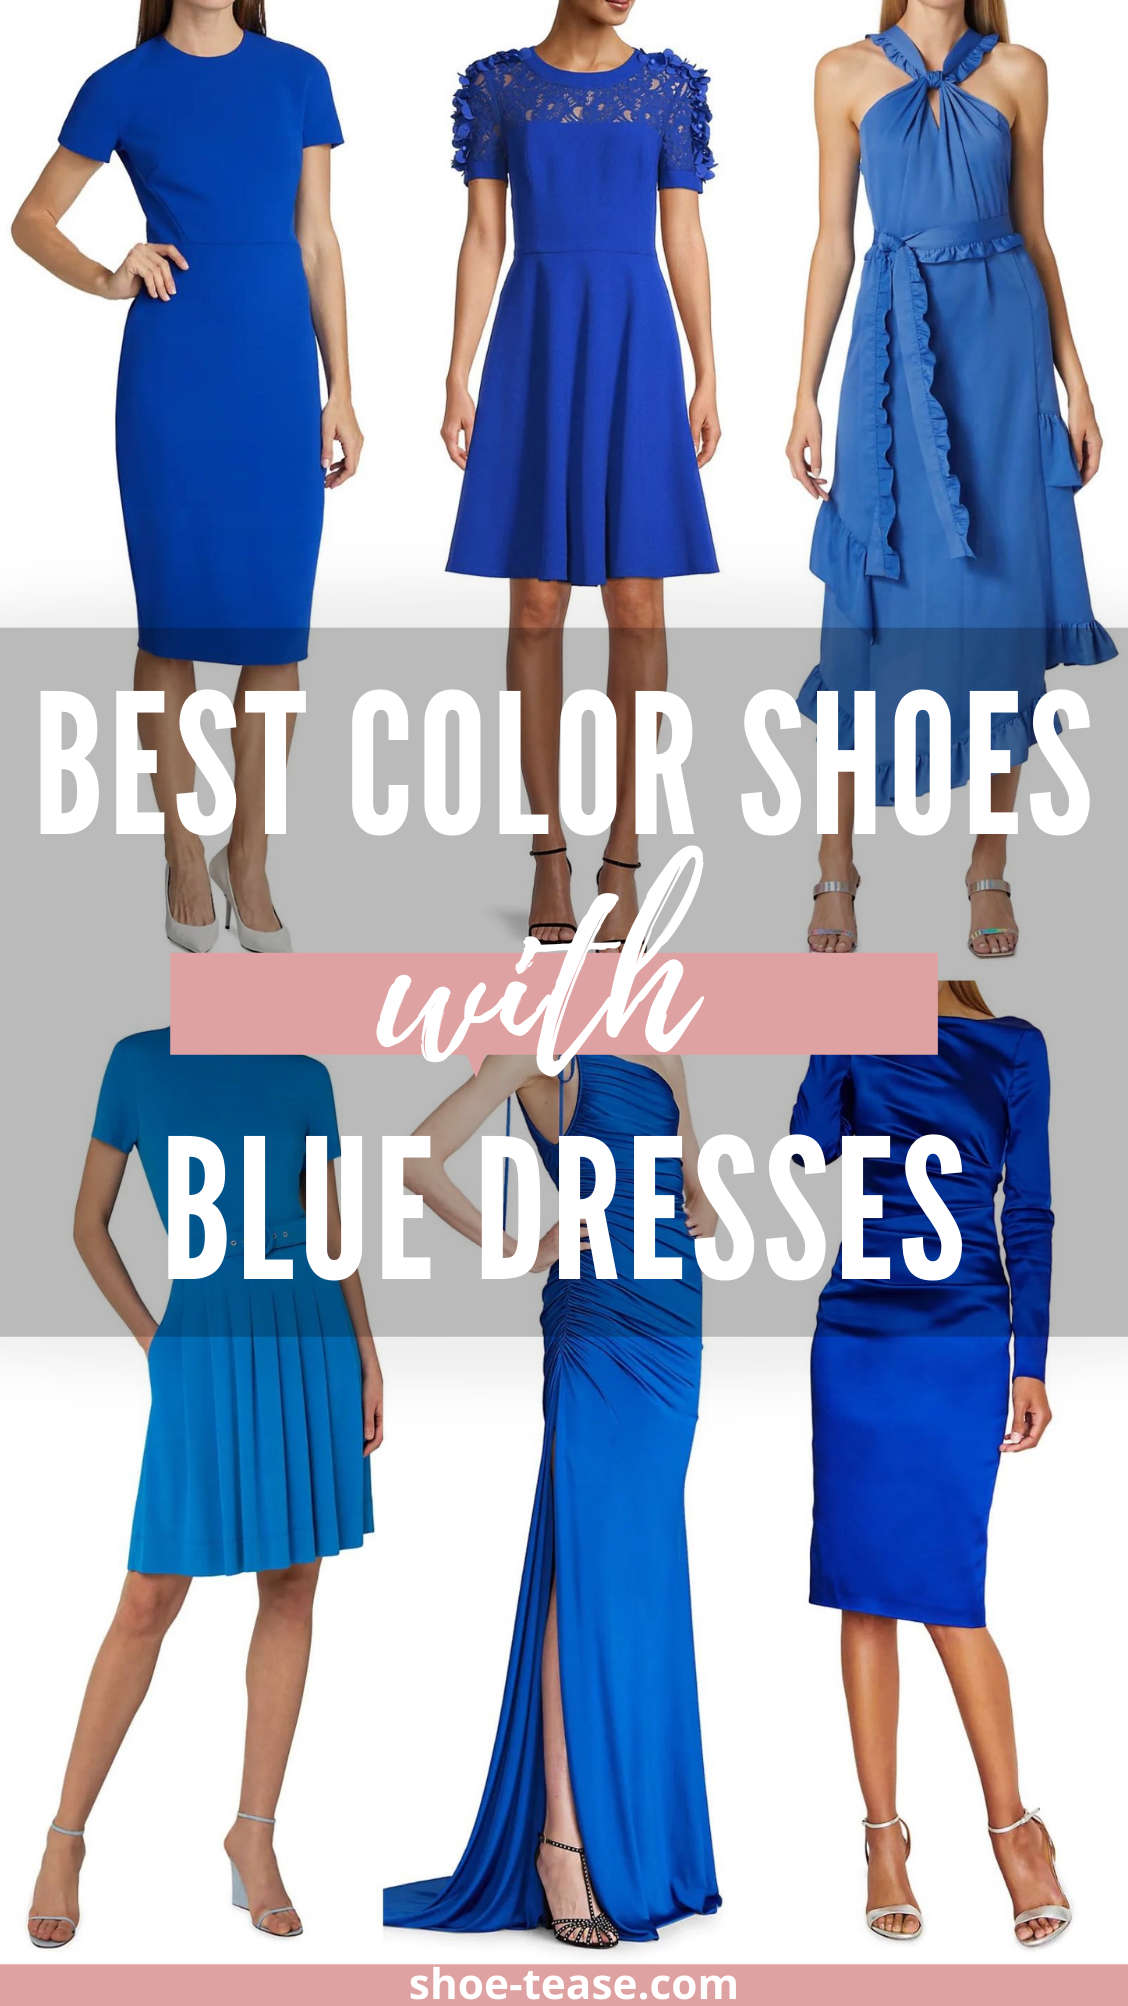 Shoes to wear with a blue dress content 2